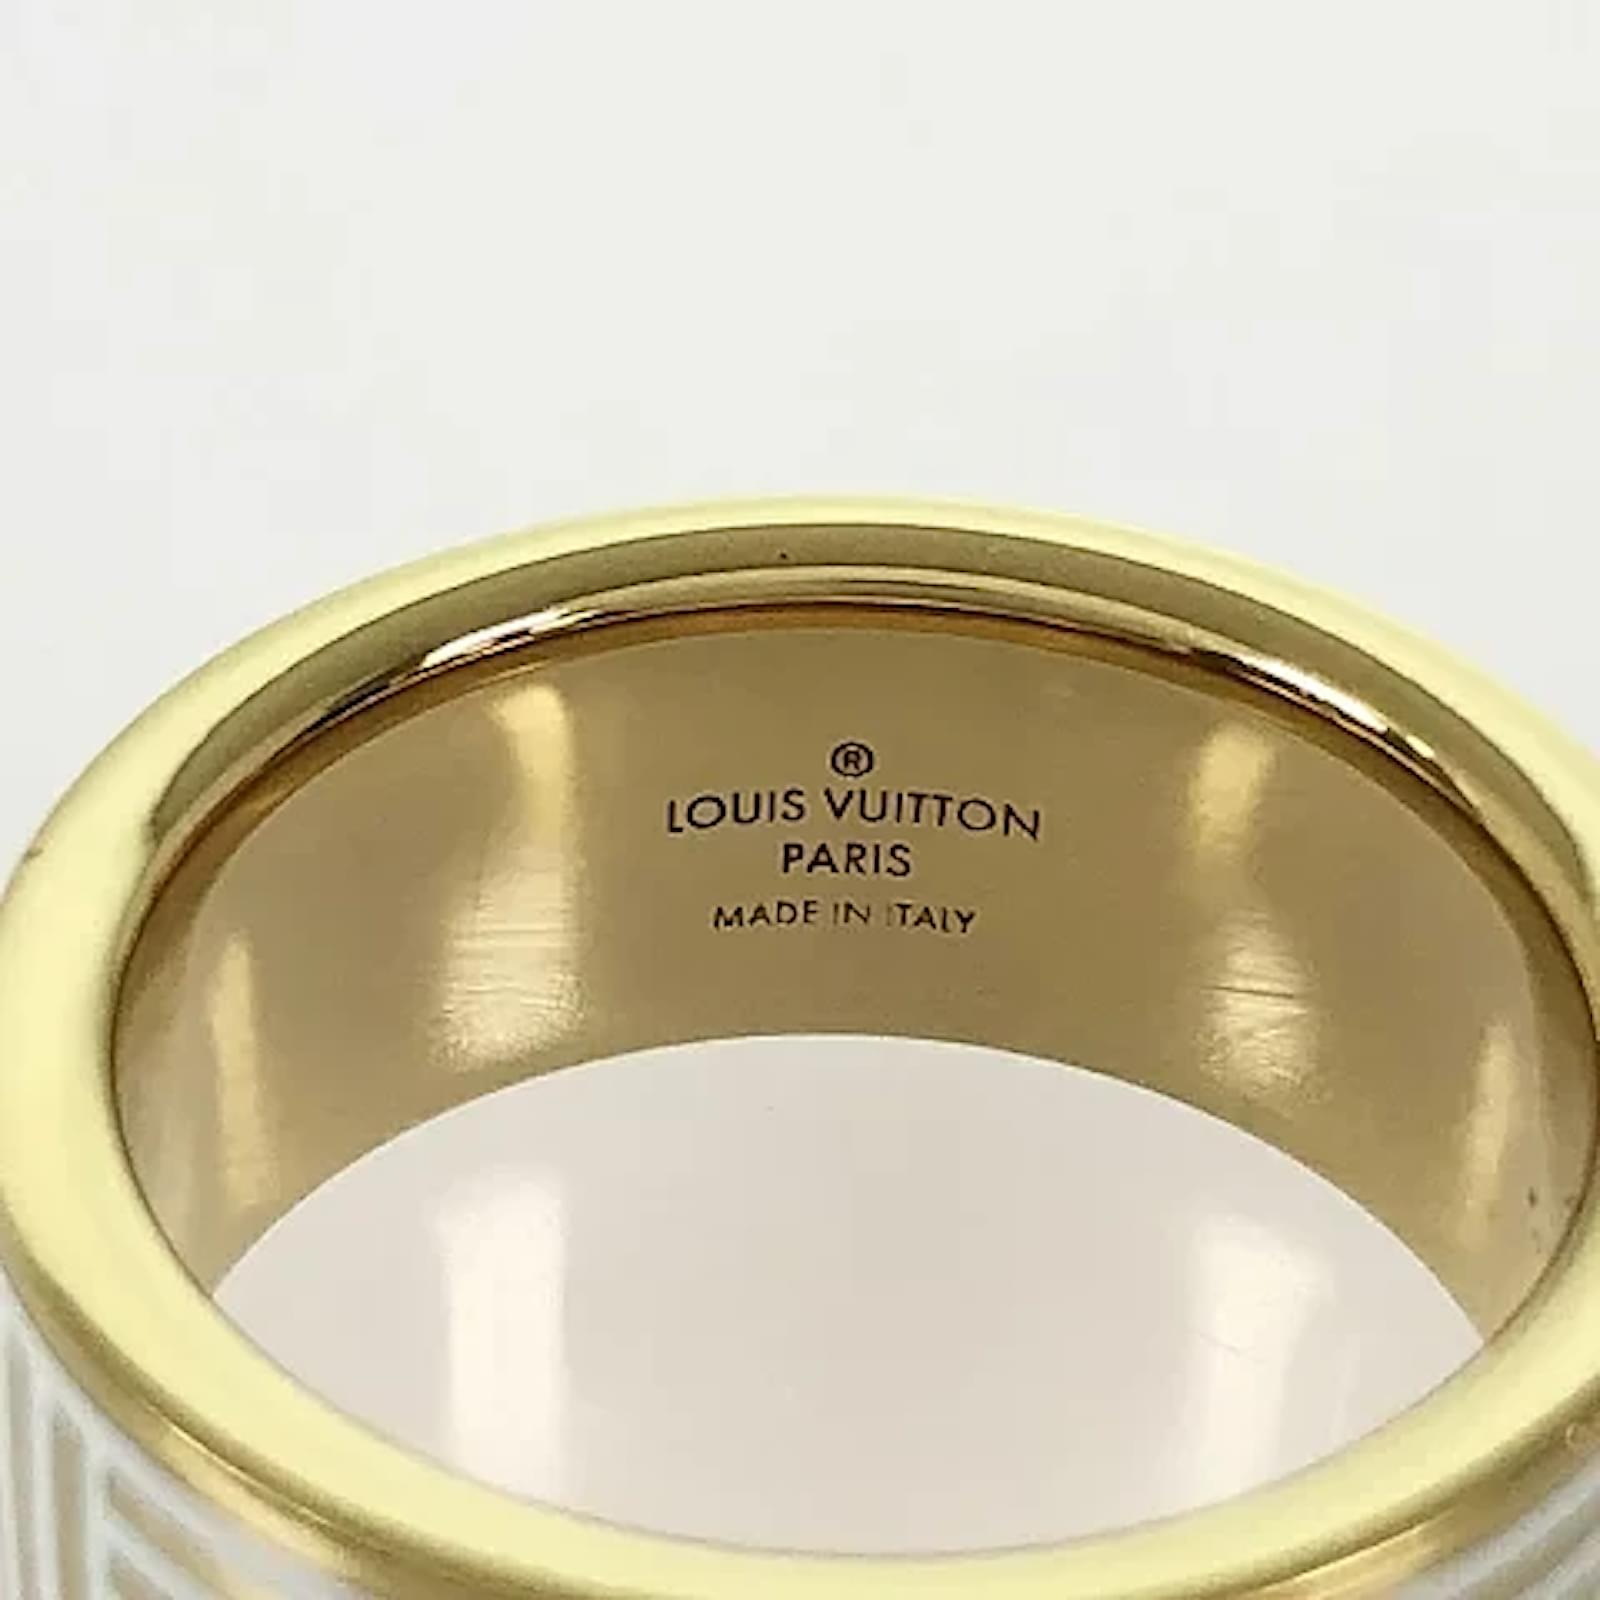 Authenticated Used Louis Vuitton LOUIS VUITTON Ring Berg Metal E Boa M65340  About 17 Metal/Wood Men's 